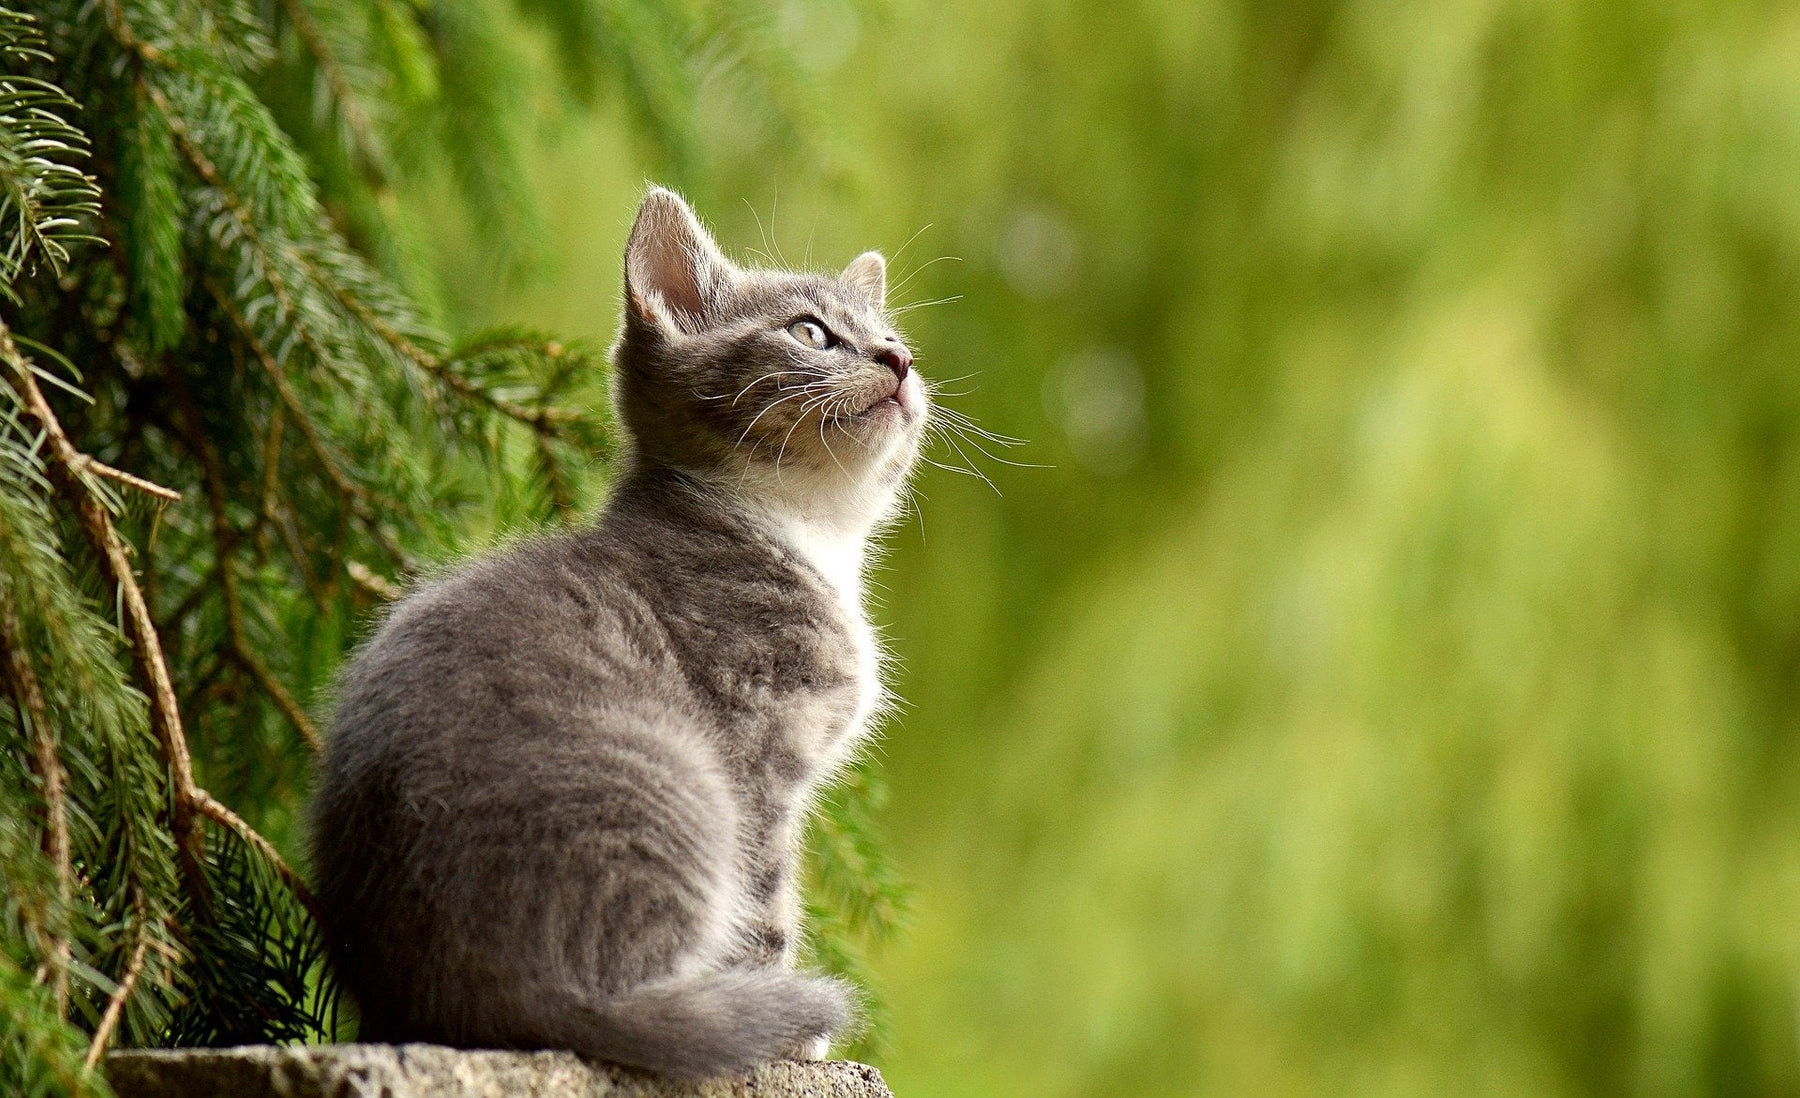 Kitty looking up surrounded by green trees